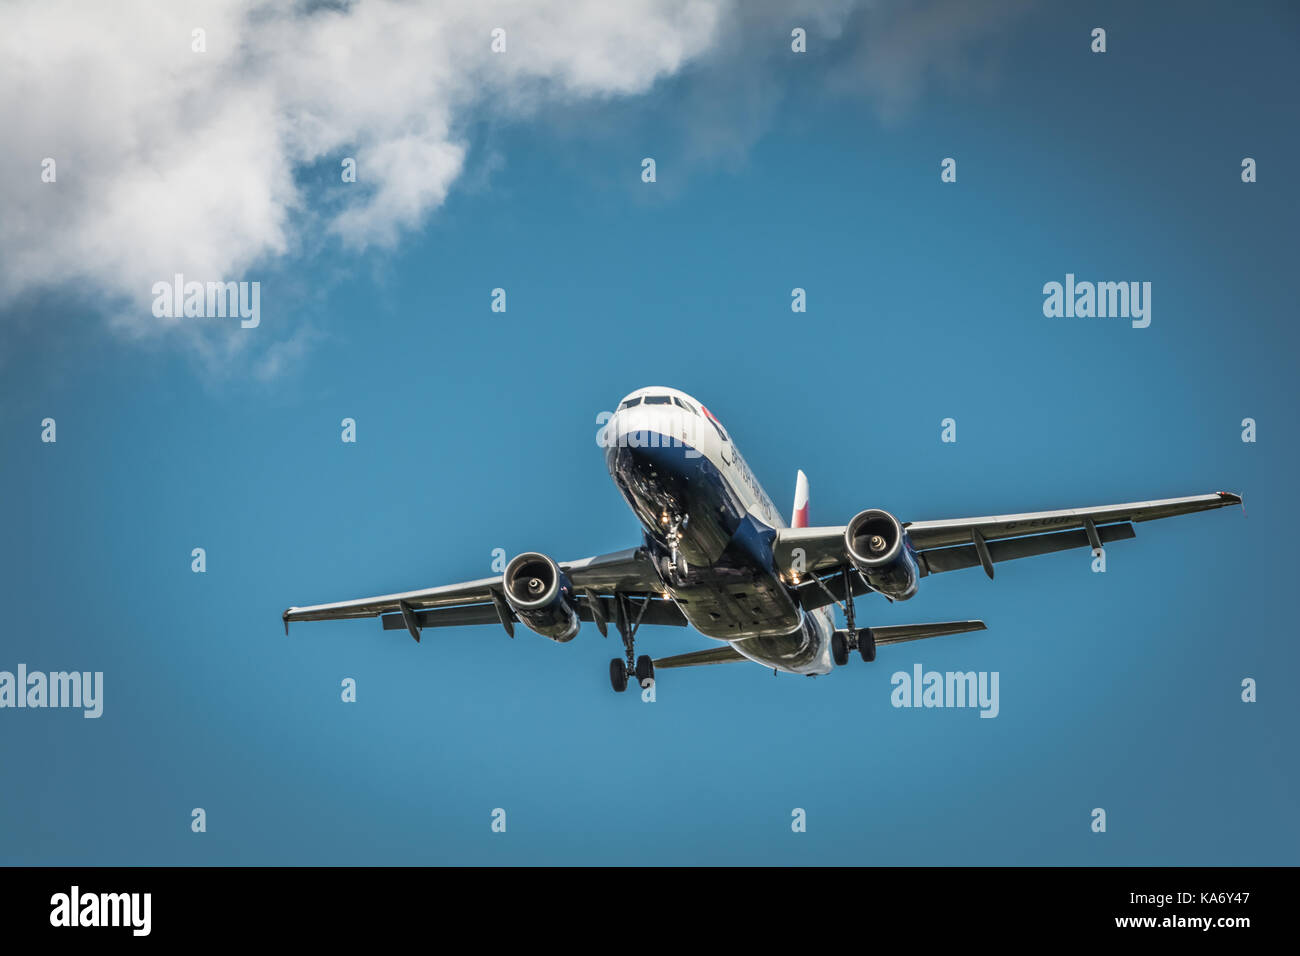 A low fow flying jet aircraft descending towards Heathrow Airport, Terminal 4, in Hounslow, Middlesex, UK. Stock Photo